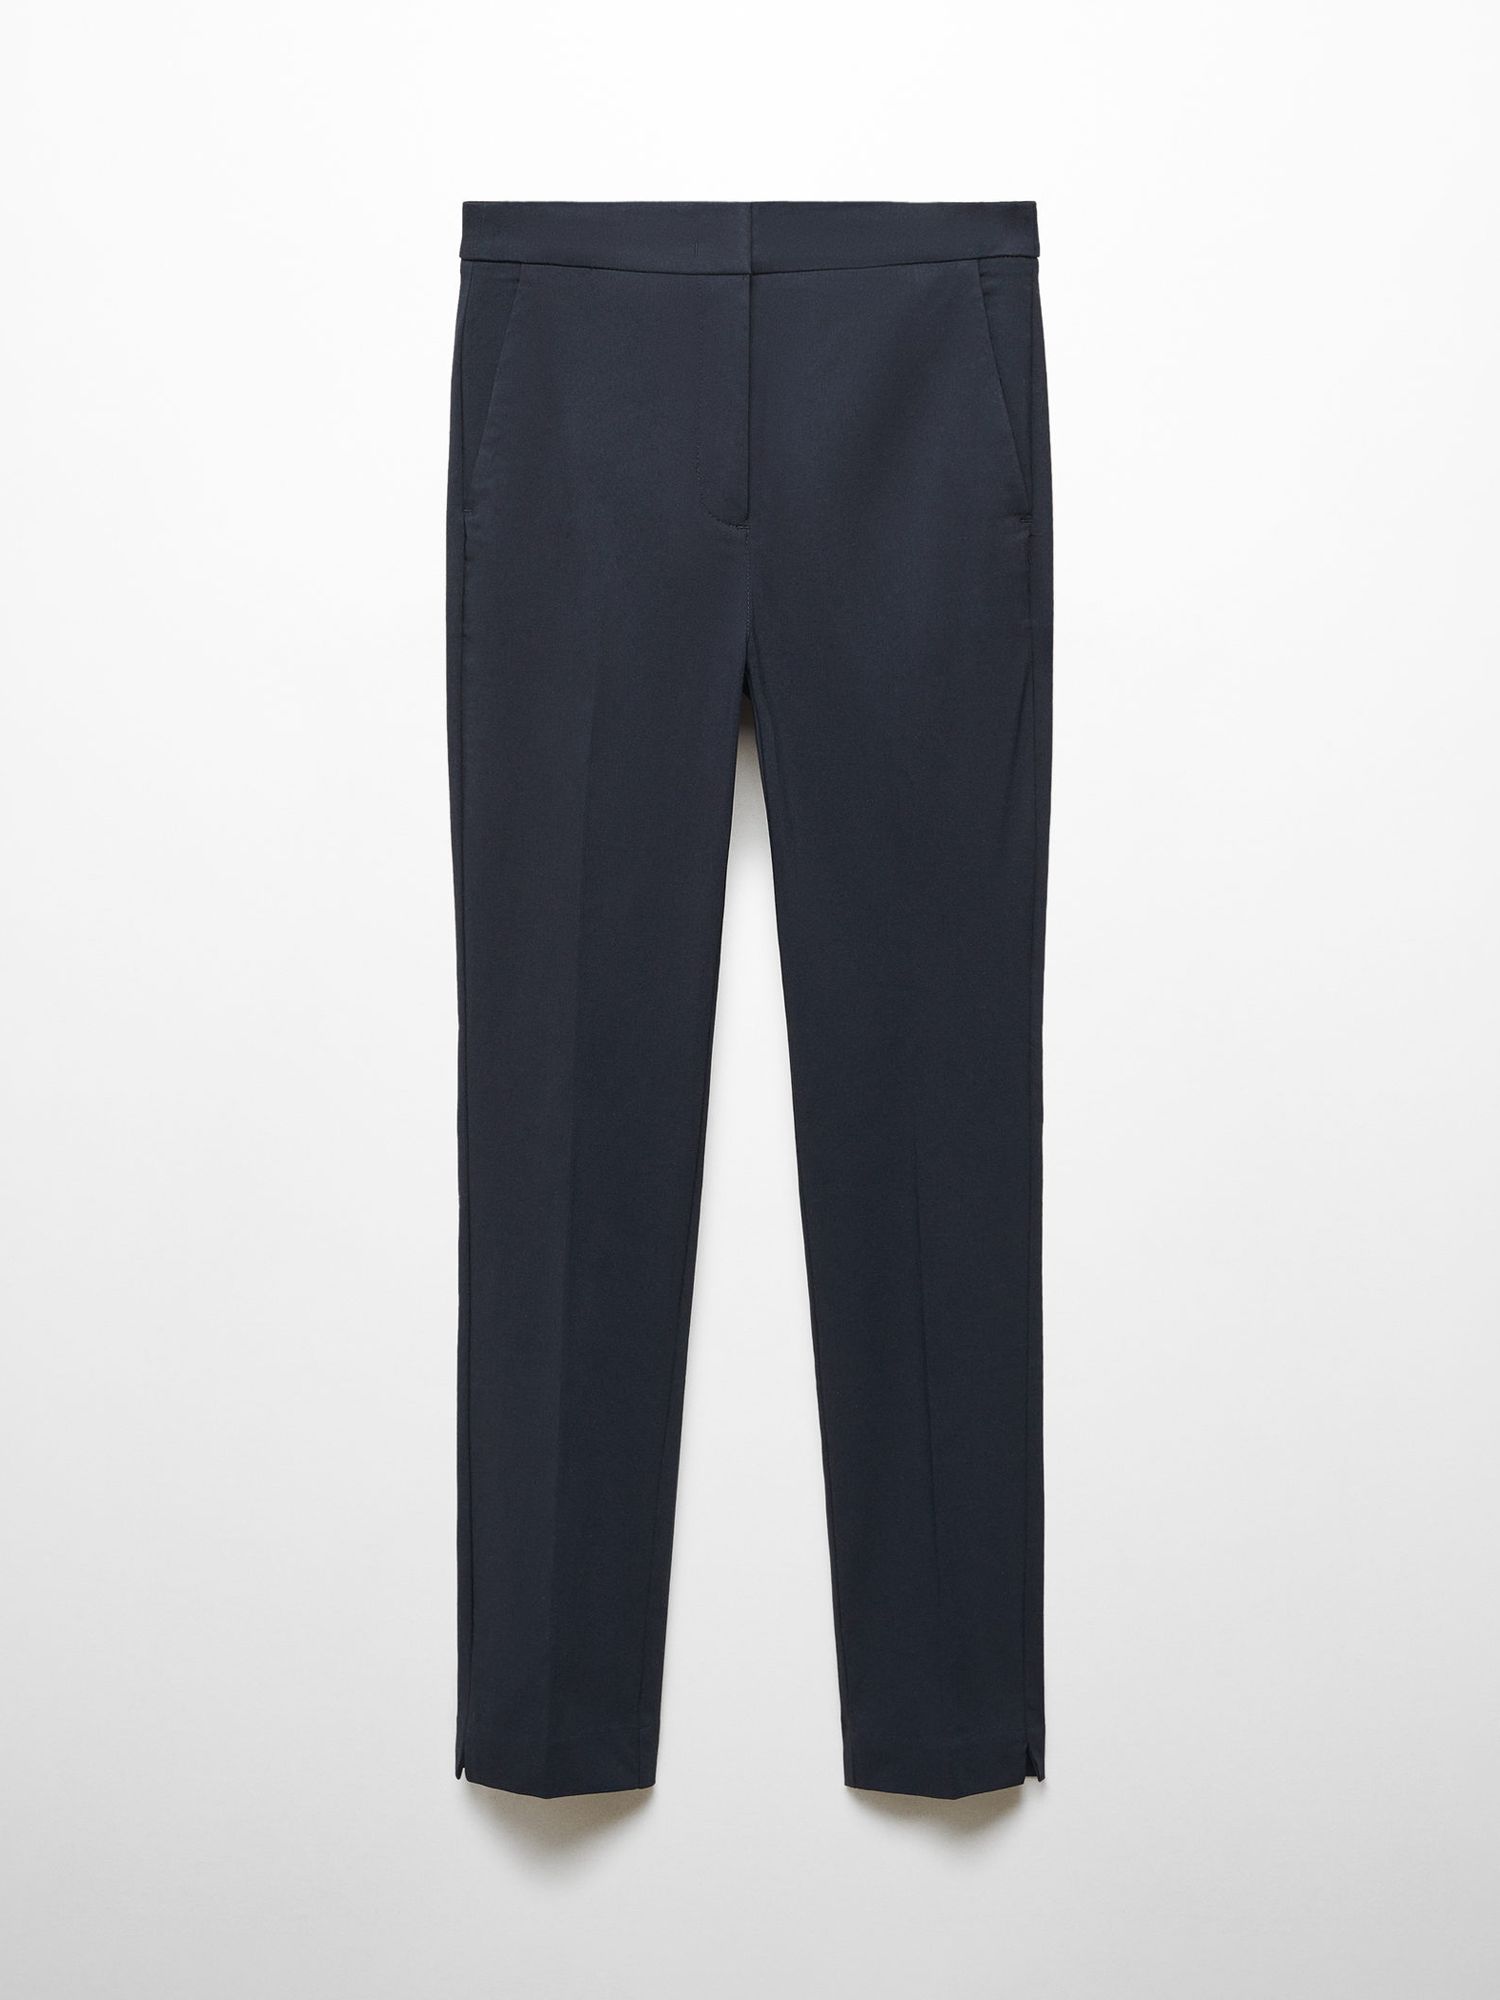 Mango Cola Tailored Trousers, Navy, 4